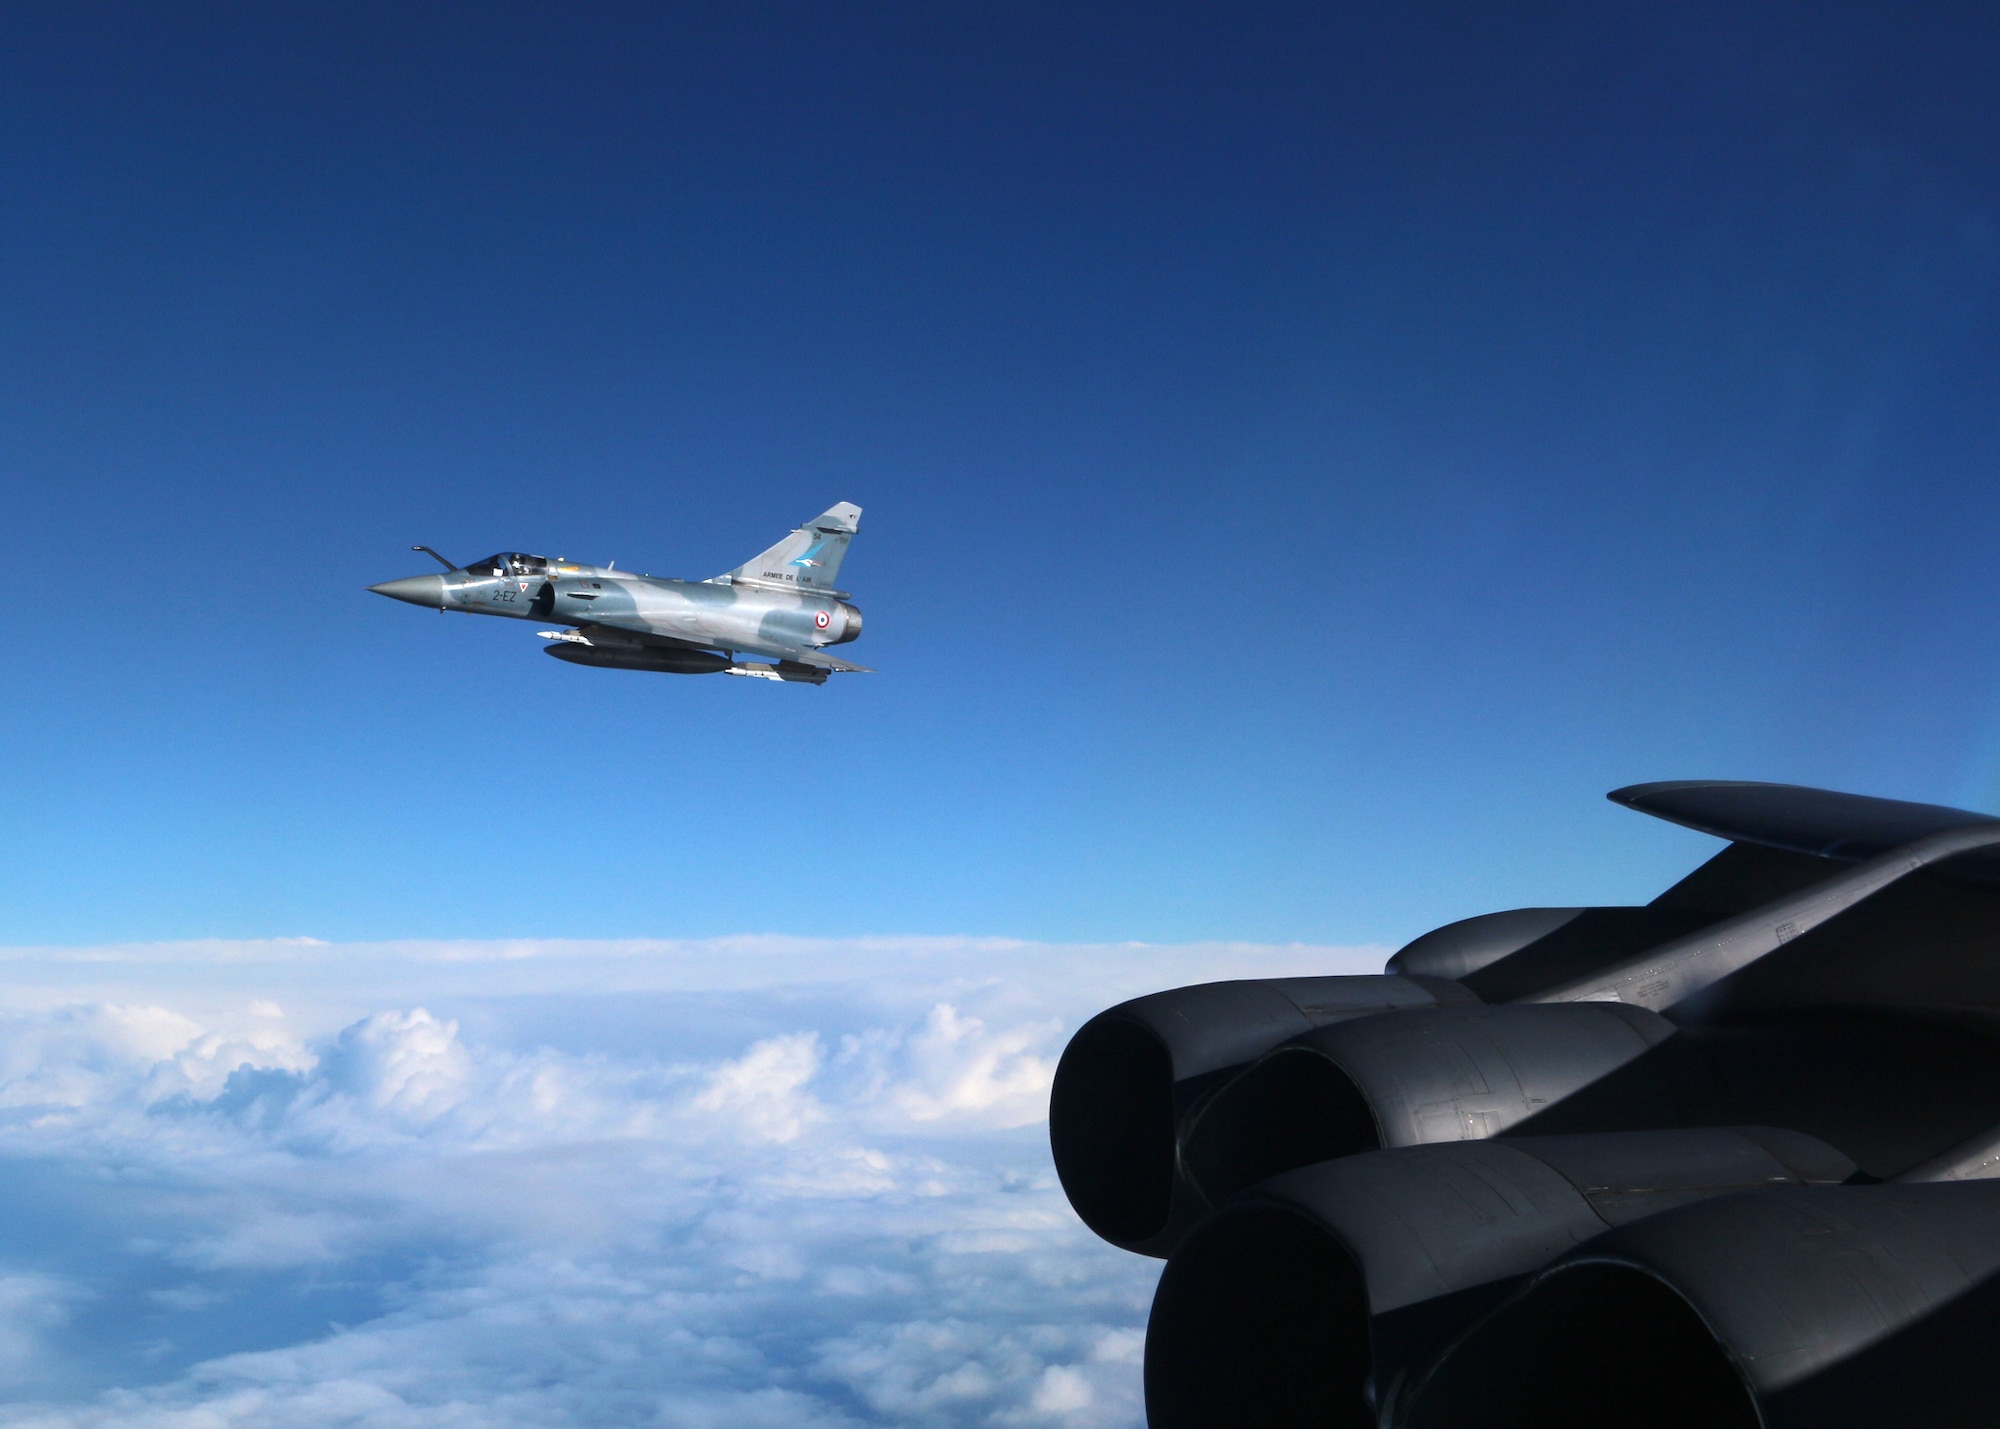 A French Mirage 2000 holds station off the wing of a U.S. Air Force B-52 Stratofortress in the skies over northern France March 1, 2016. Several B-52s participated in French-led close air support exercise Serpentex for the first time this year, joining forces from a dozen nations to train and develop better tactics, techniques and procedures. (U.S. Air Force courtesy photo)